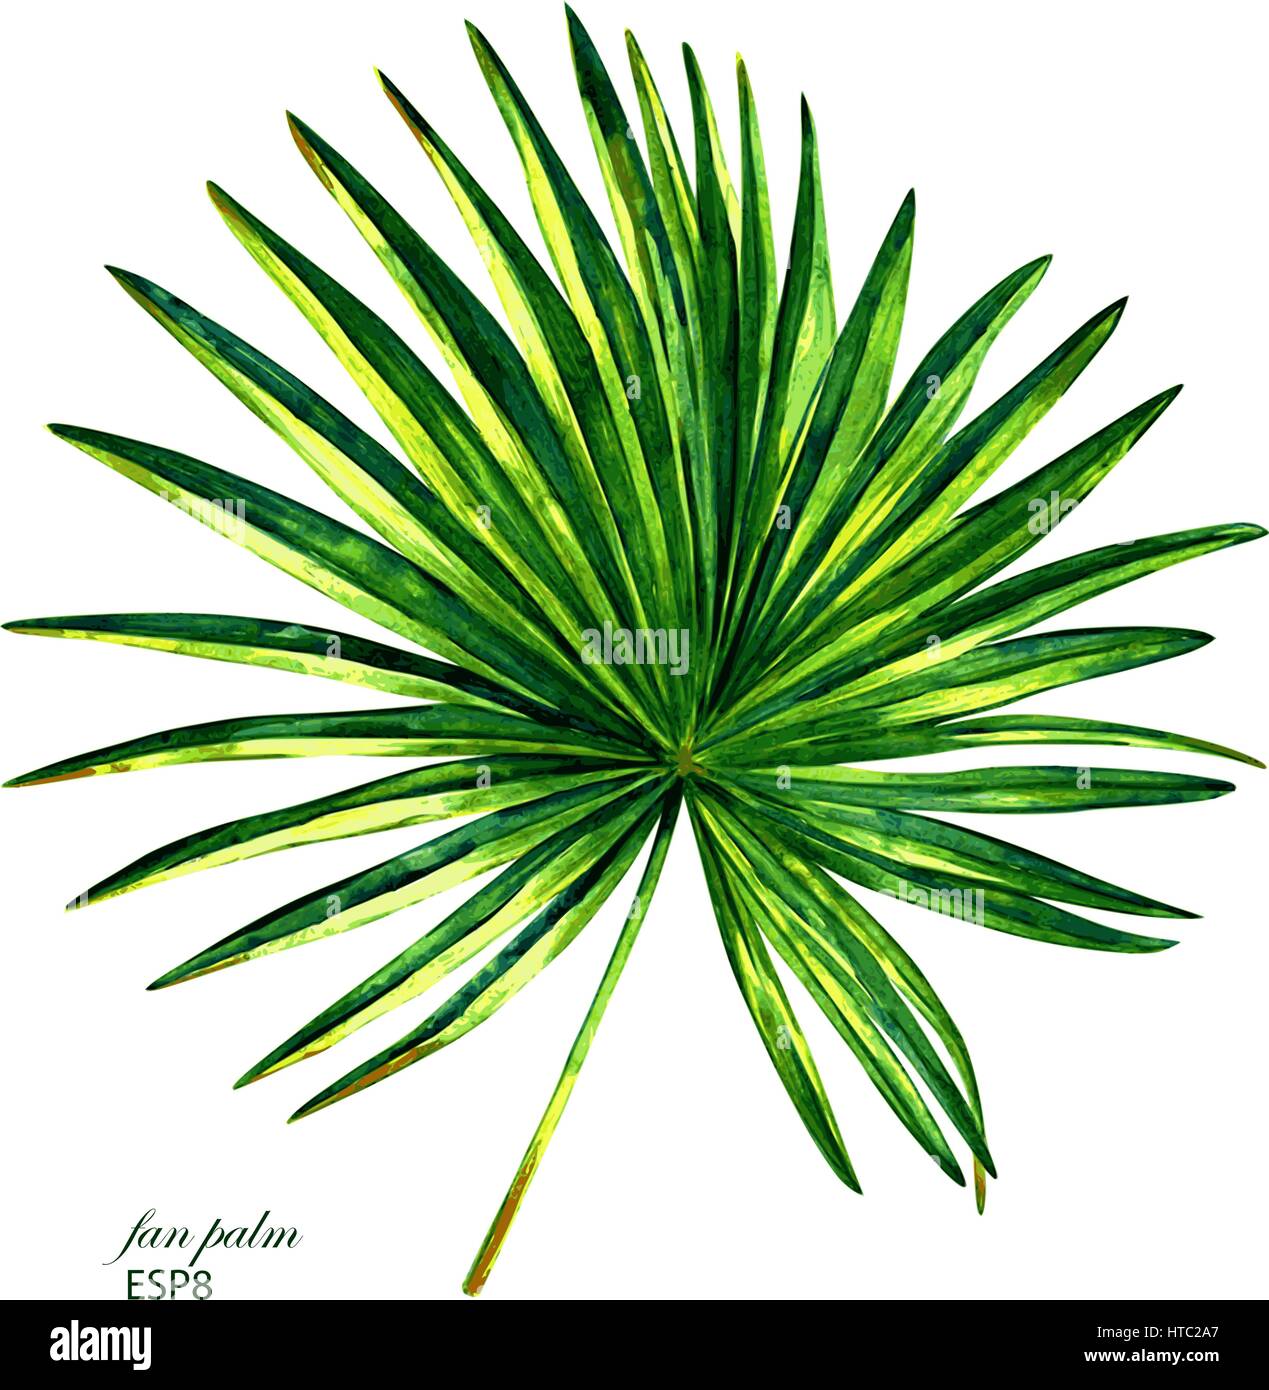 Hand painted vector watercolor palmetto tree. Botanical illustration of fan shaped palm leaf, isolated on white background. Stock Vector